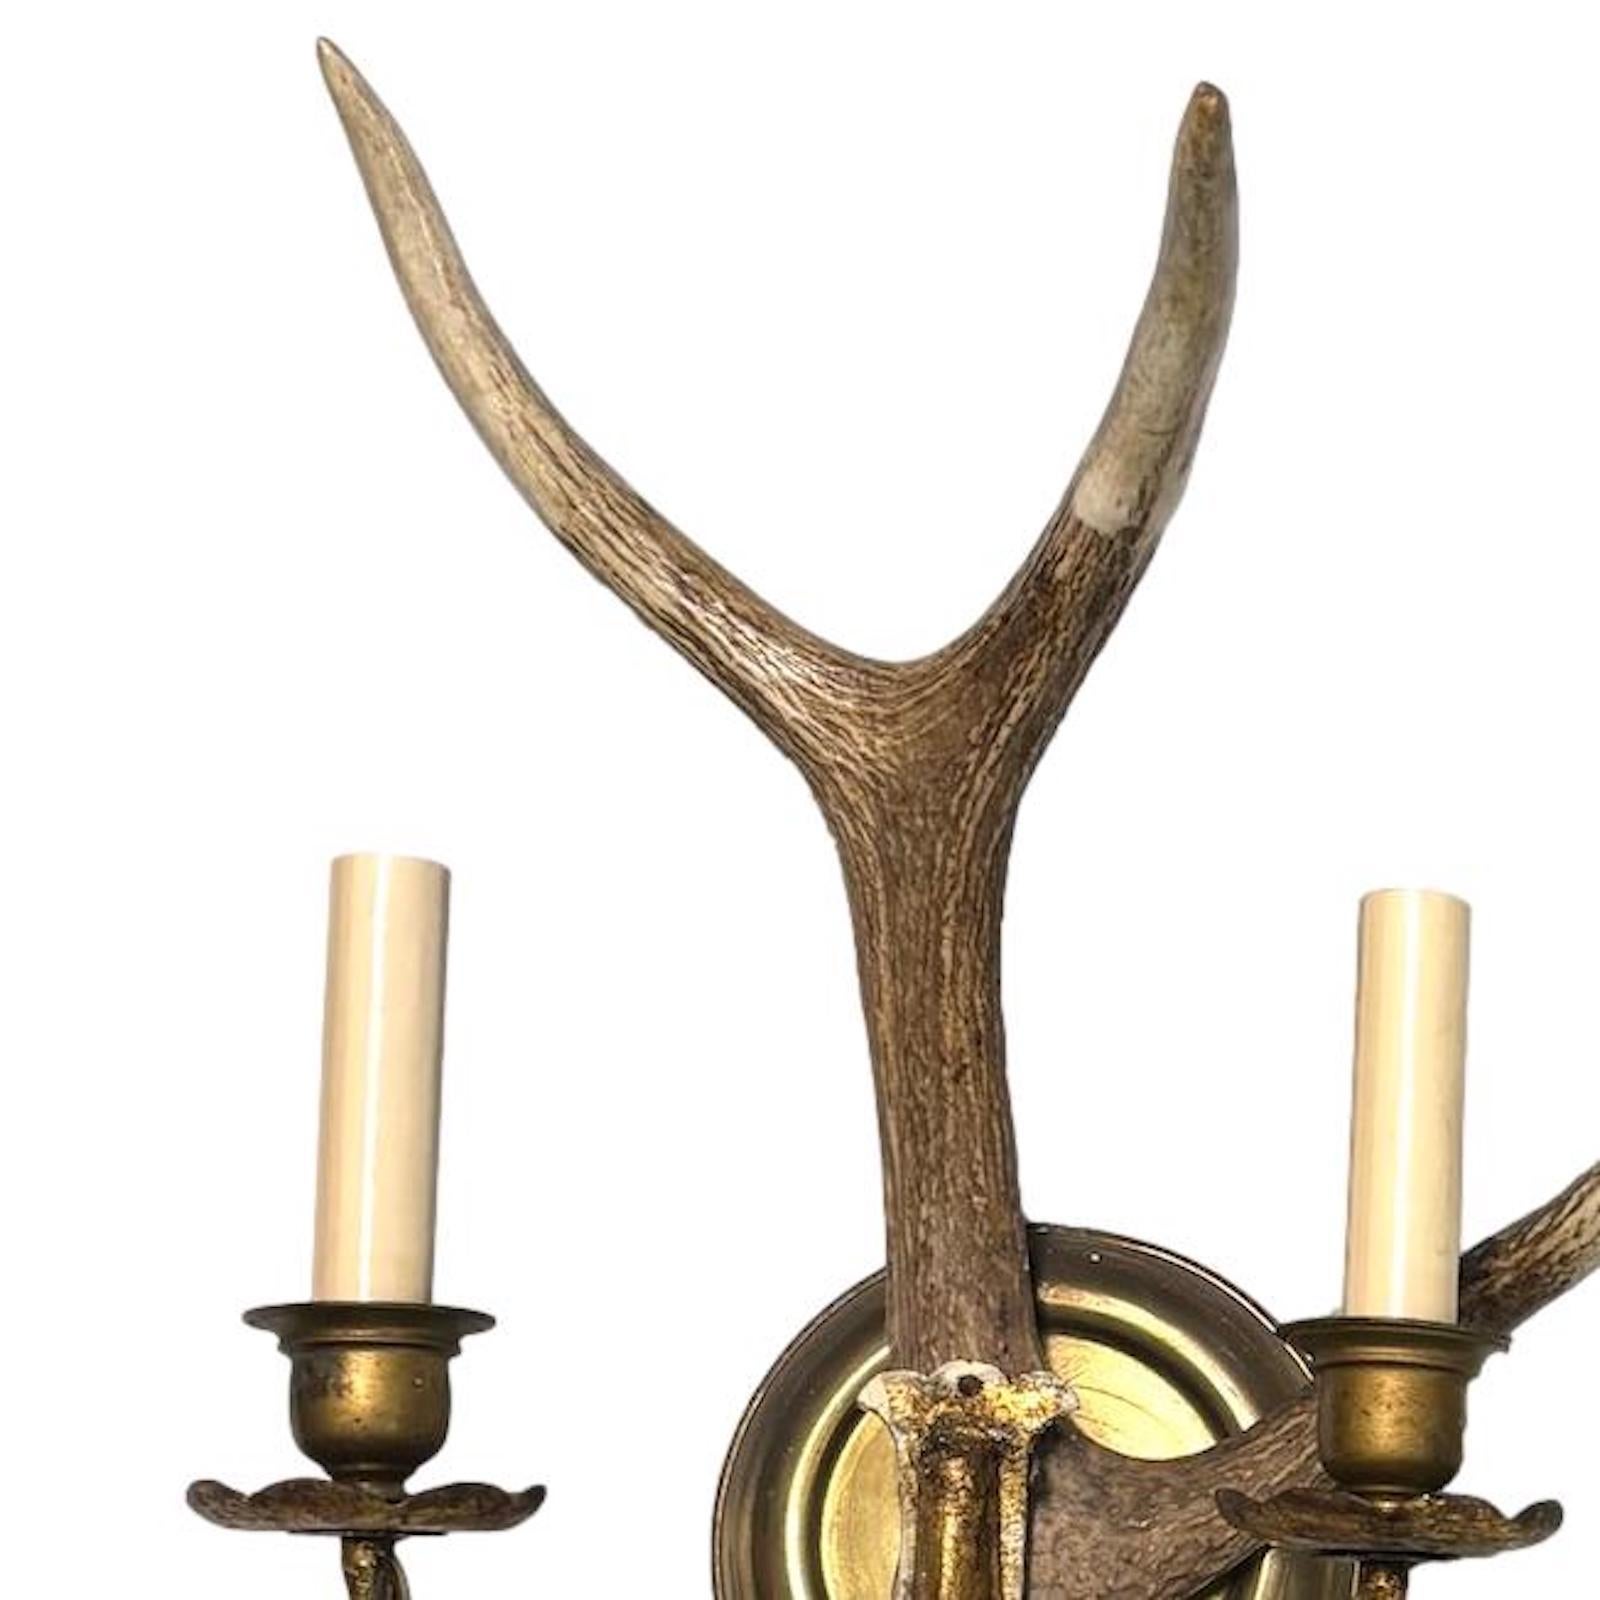 Pair of circa 1930's Northern Italian antler sconces with 2 lights.

Measurements:
Height: 23”
Width: 14”
Depth: 9”